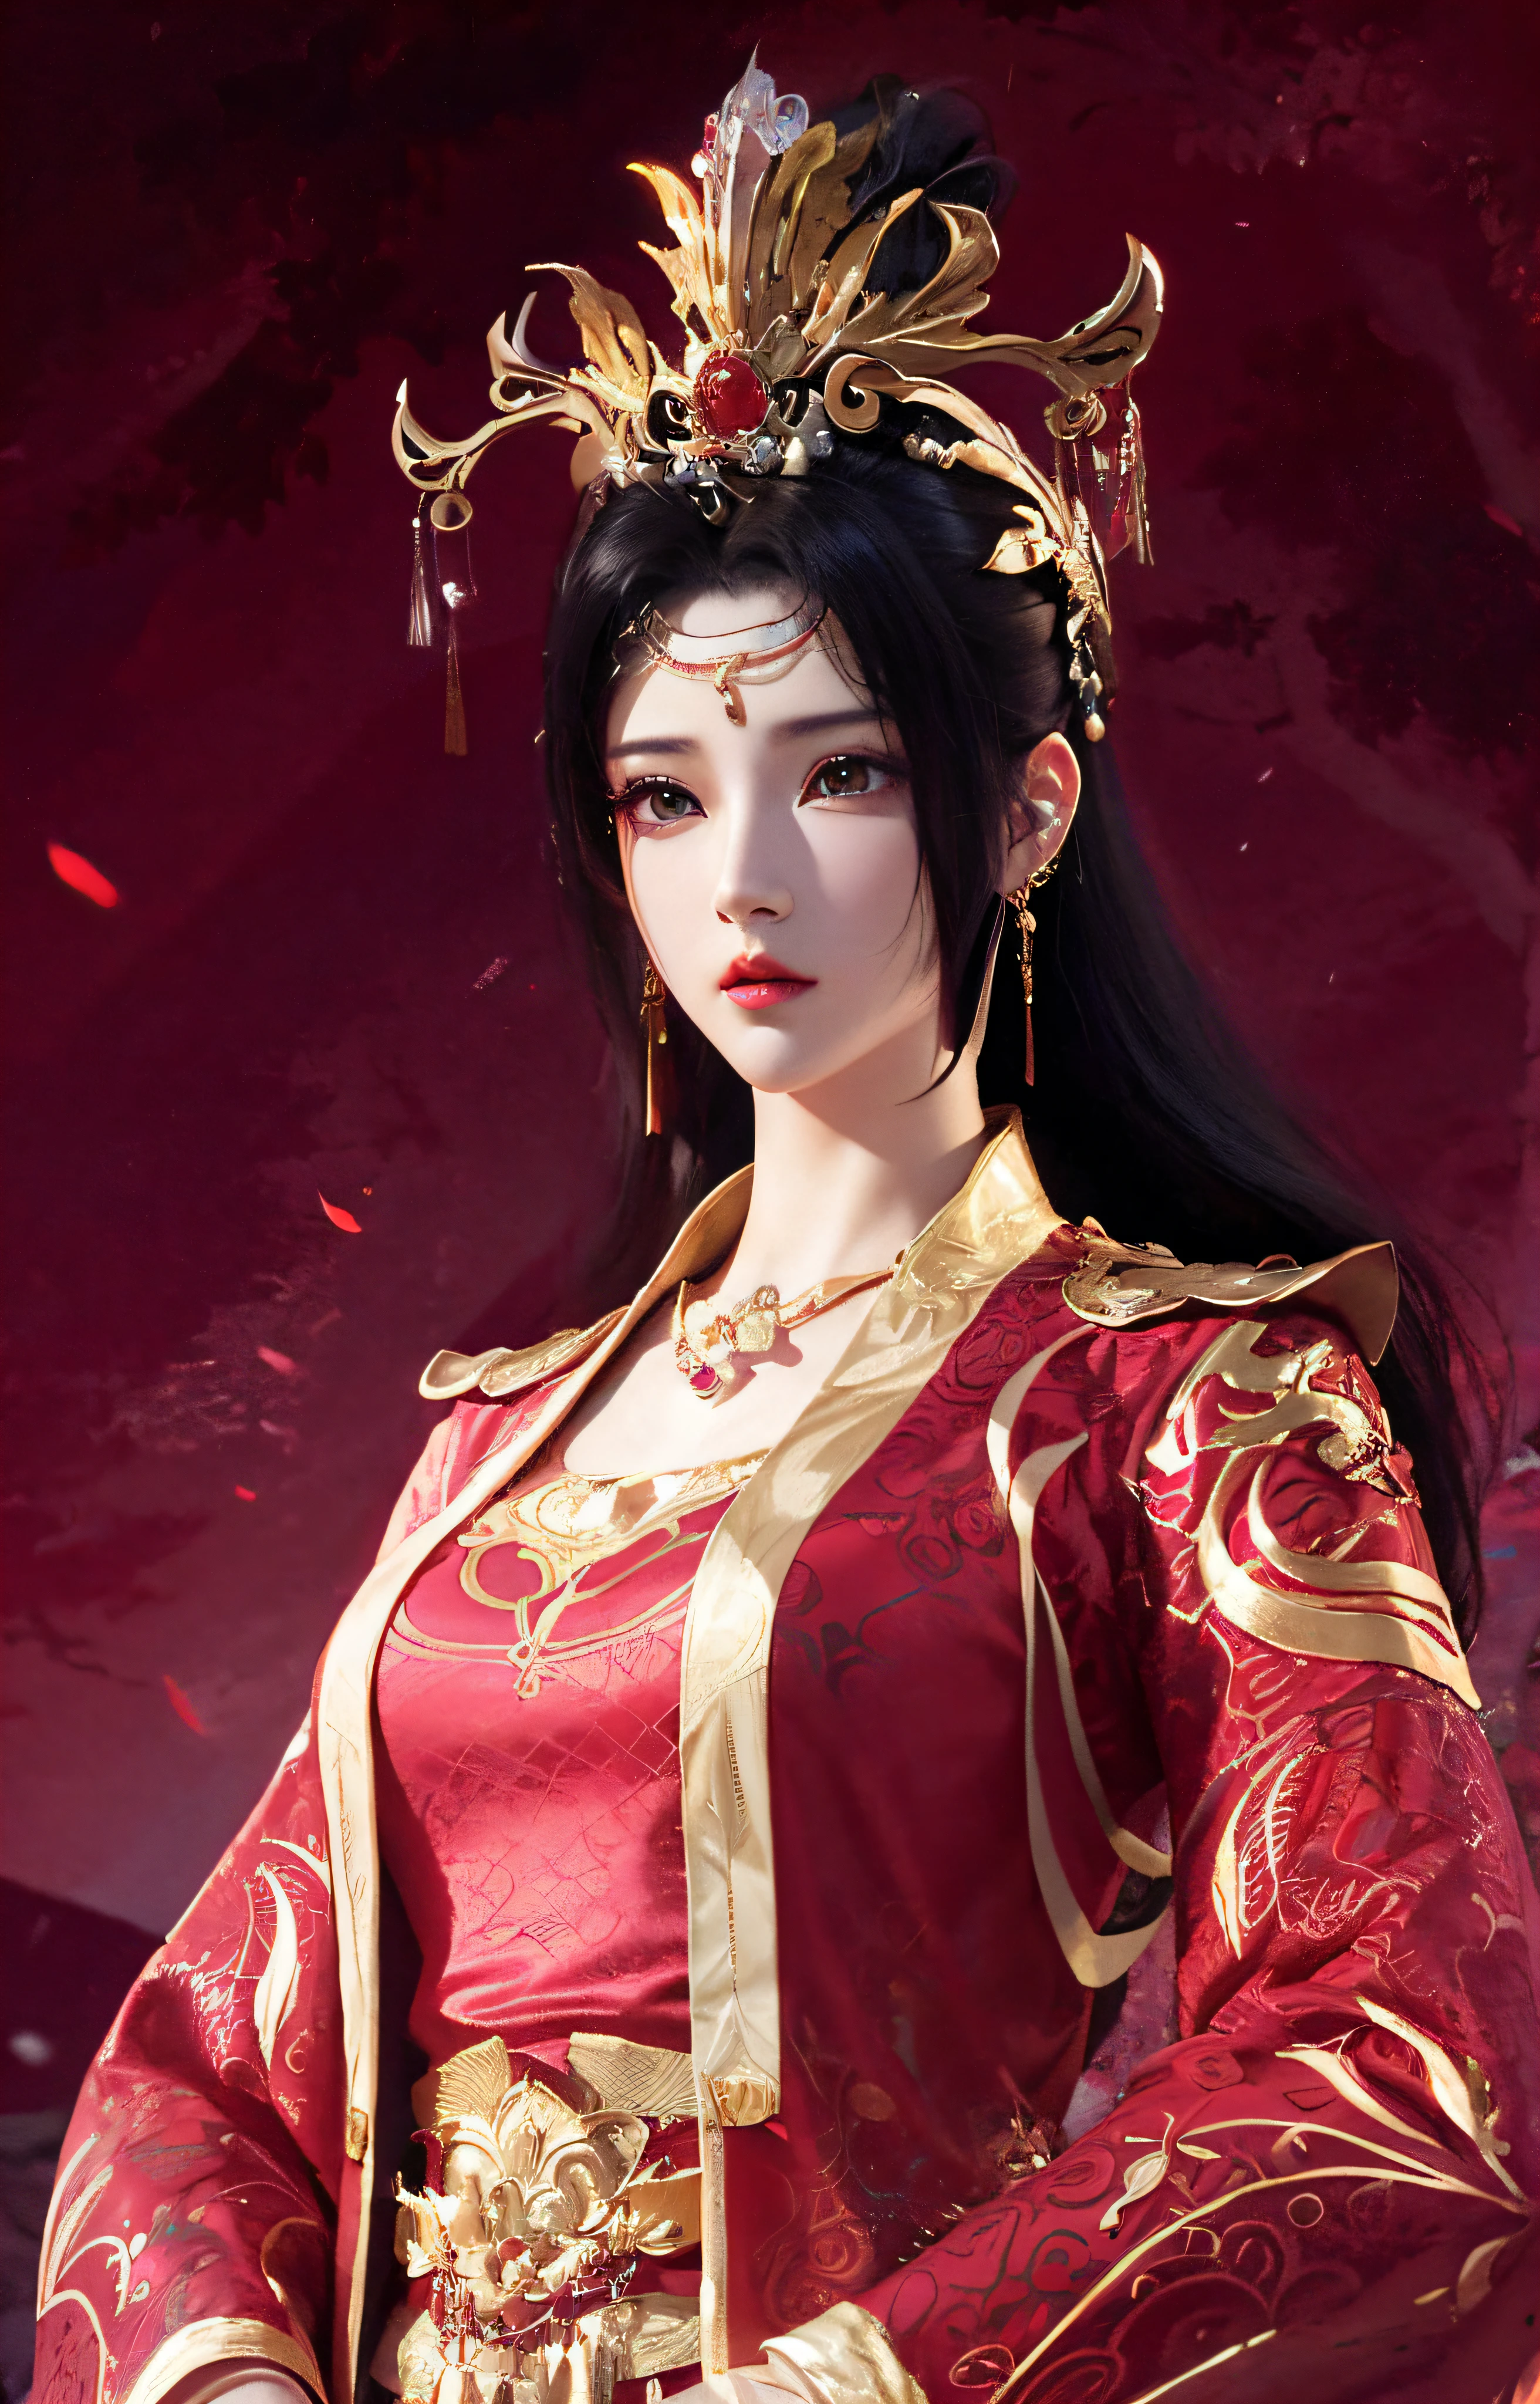 Close-up of a woman in a red dress and gold jewelry，Royal Sister，Superb beauty，a queen，Beautiful and elegant queen, portrait of a queen,  Xianxia, a beautiful fantasy empress, xianxia fantasy, Beautiful young wind spirit, inspired by Li Mei-shu, ((a beautiful fantasy empress)), xianxia hero, 3 d anime realistic, full-body xianxia, Smooth anime CG art